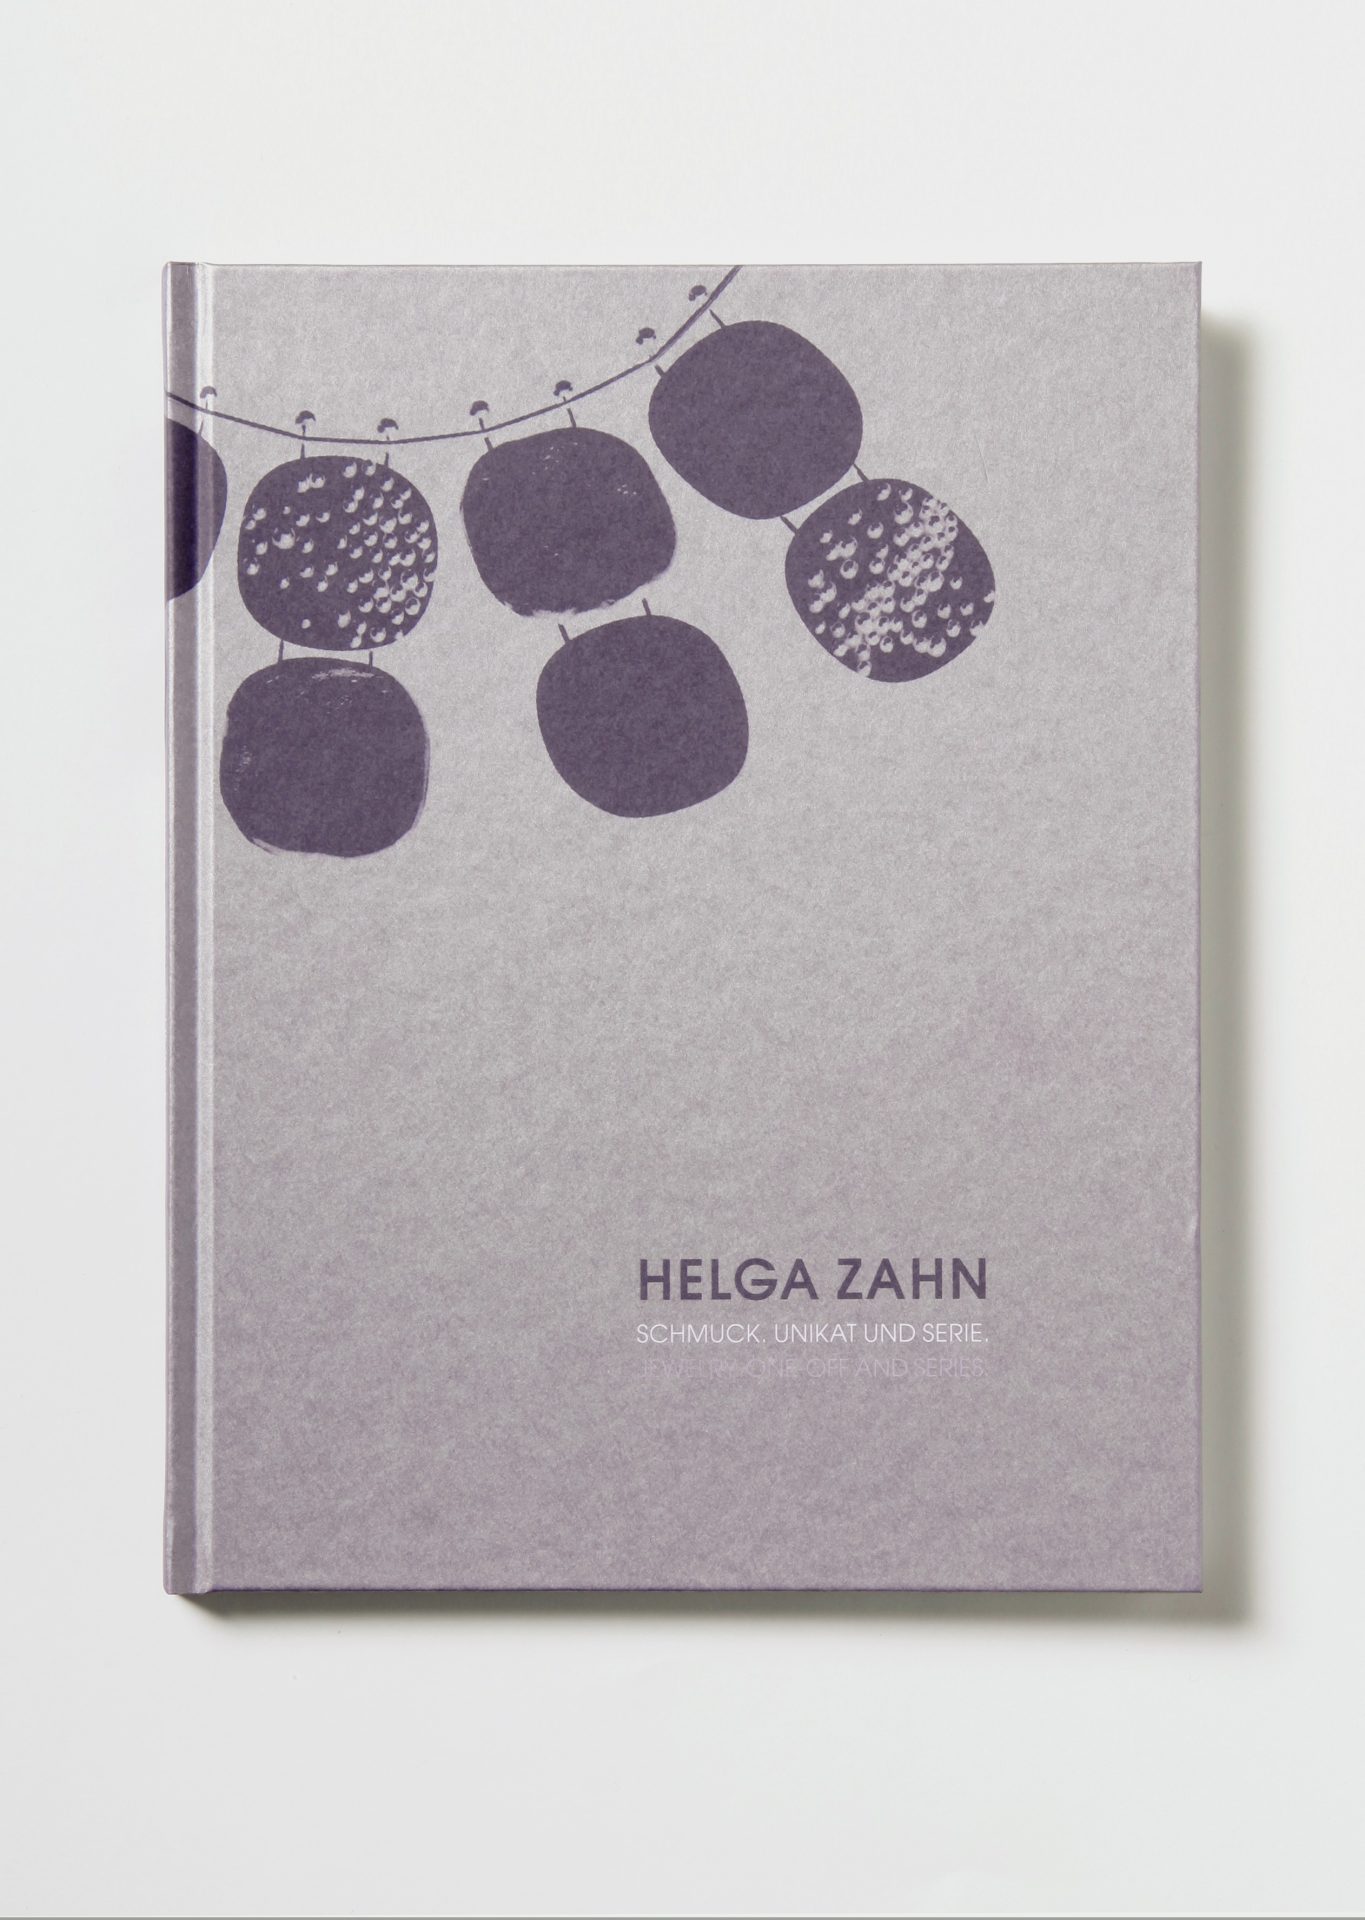 Parts of a necklace on a light grey background in the upper left corner: three elements on a wire, each consisting of two rounded rectangles joined together. Inscription at bottom right: Helga Zahn jewellery. Unique piece and series.